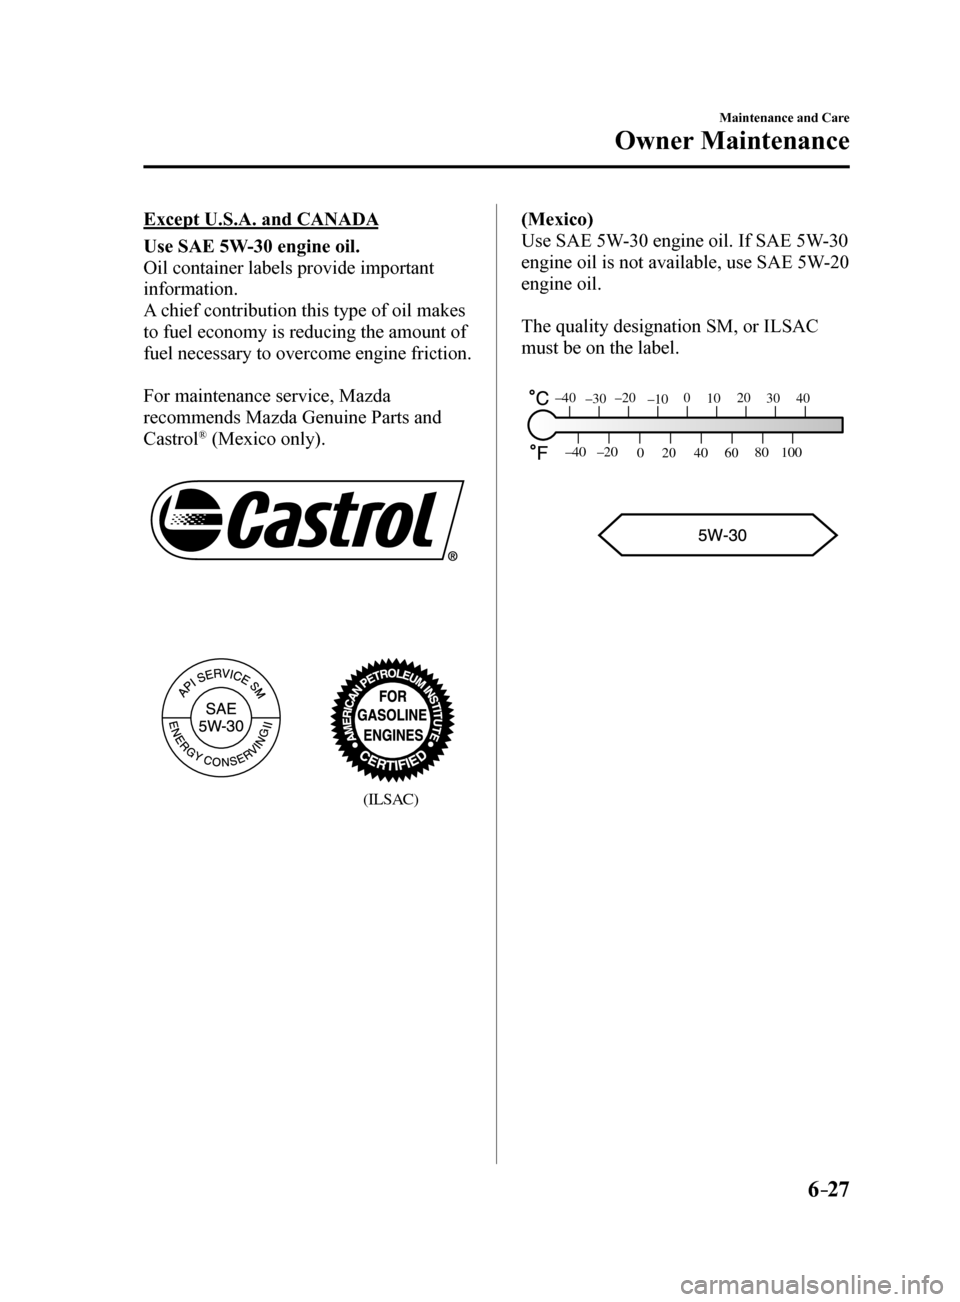 MAZDA MODEL 6 2017   (in English) Owners Manual 6–27
Maintenance and Care
Owner Maintenance
Except U.S.A. and CANADA
Use SAE 5W-30 engine oil.
Oil container labels provide important 
information.
A chief contribution this type of oil makes 
to fu